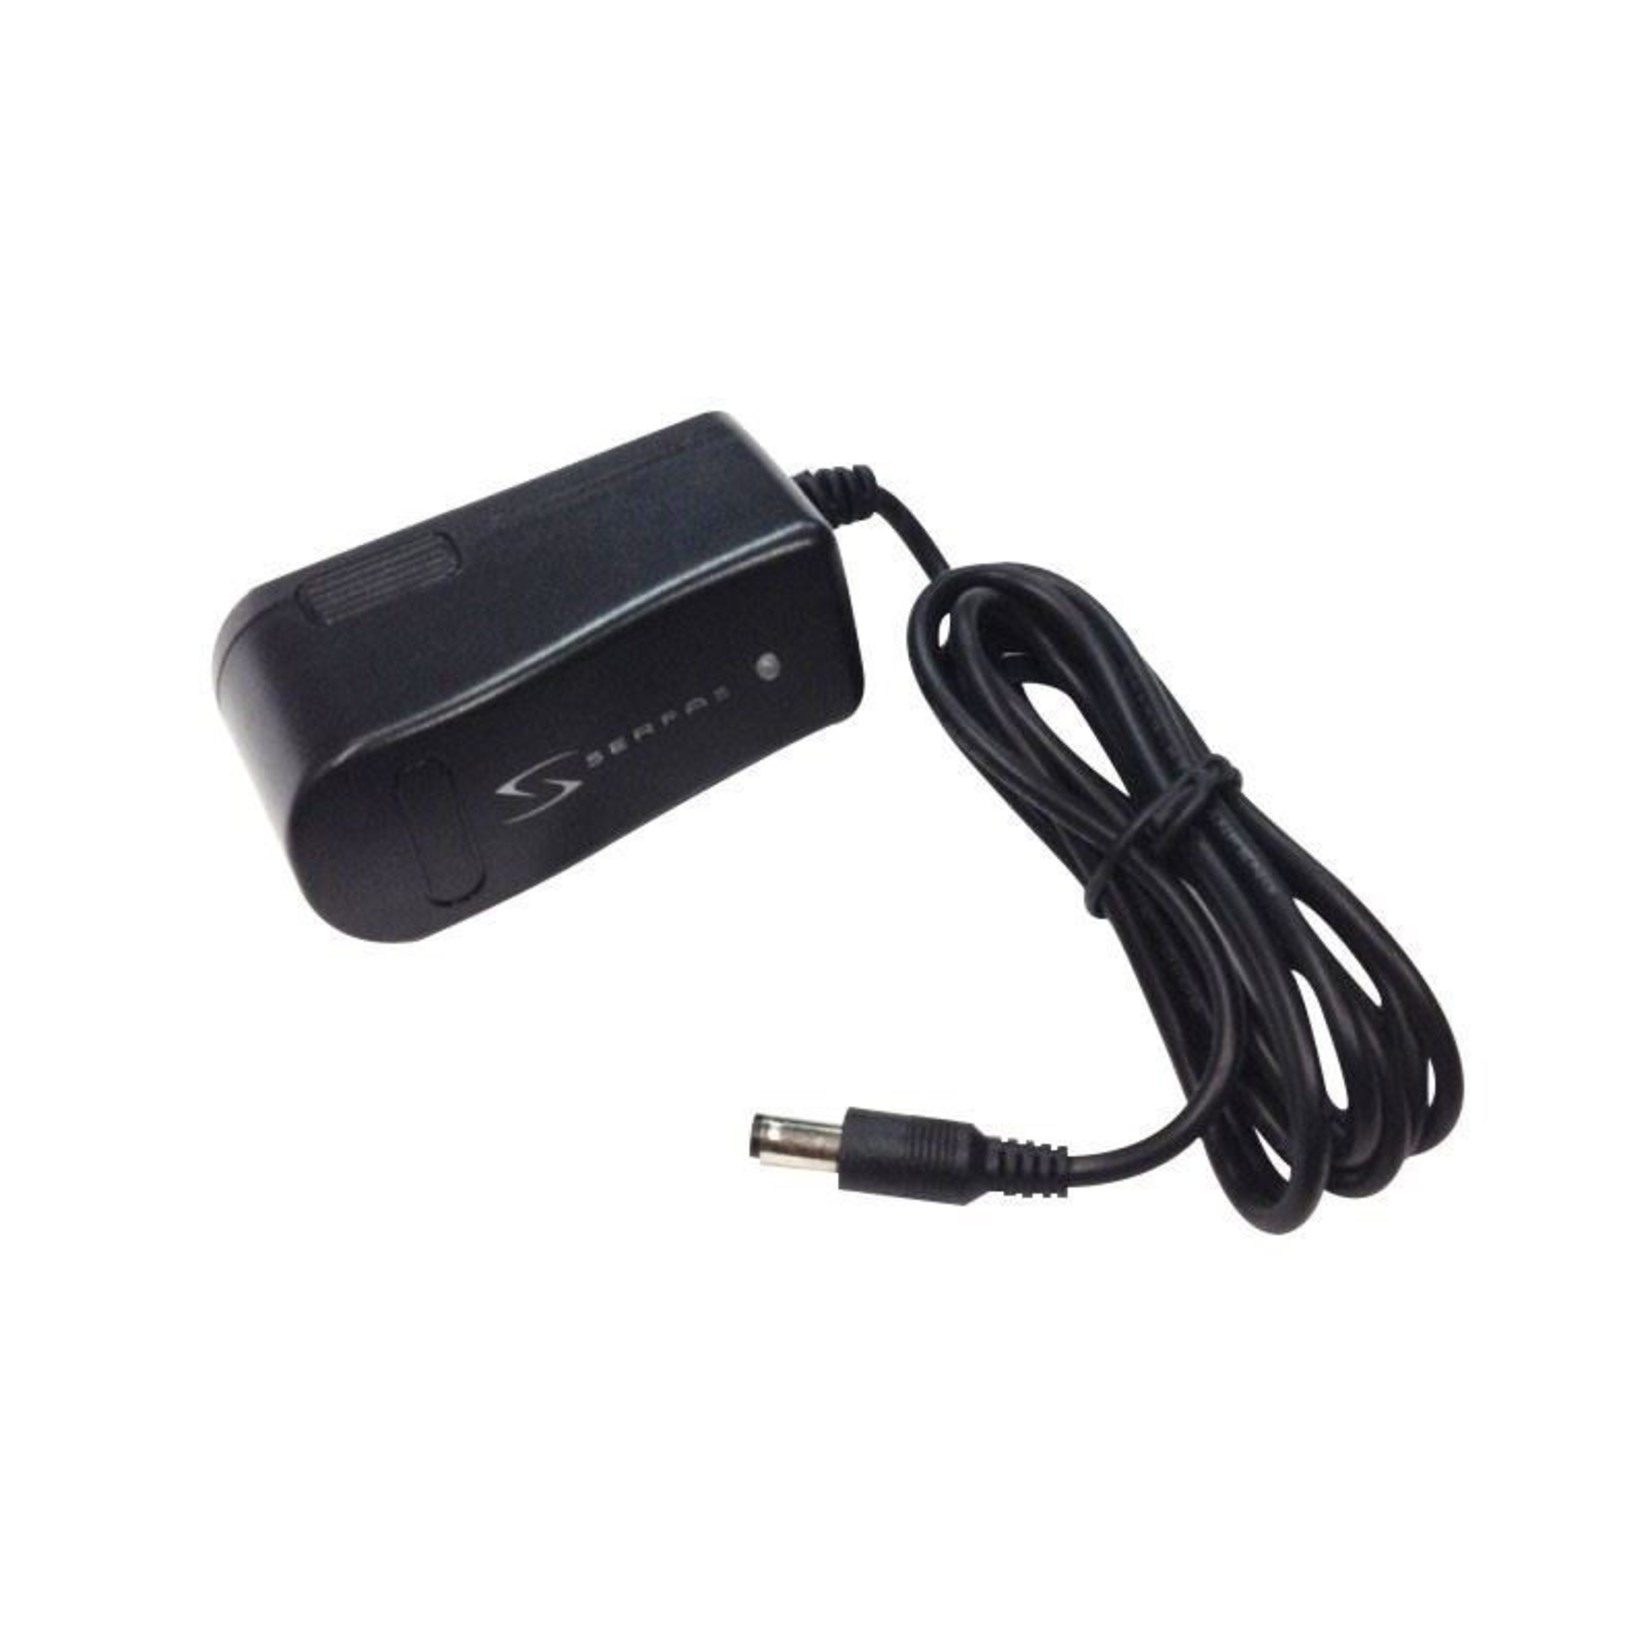 Serfas Serfas Light Spare Part - Wall Charger For TSL 1000, 1500, 1500+, 2500